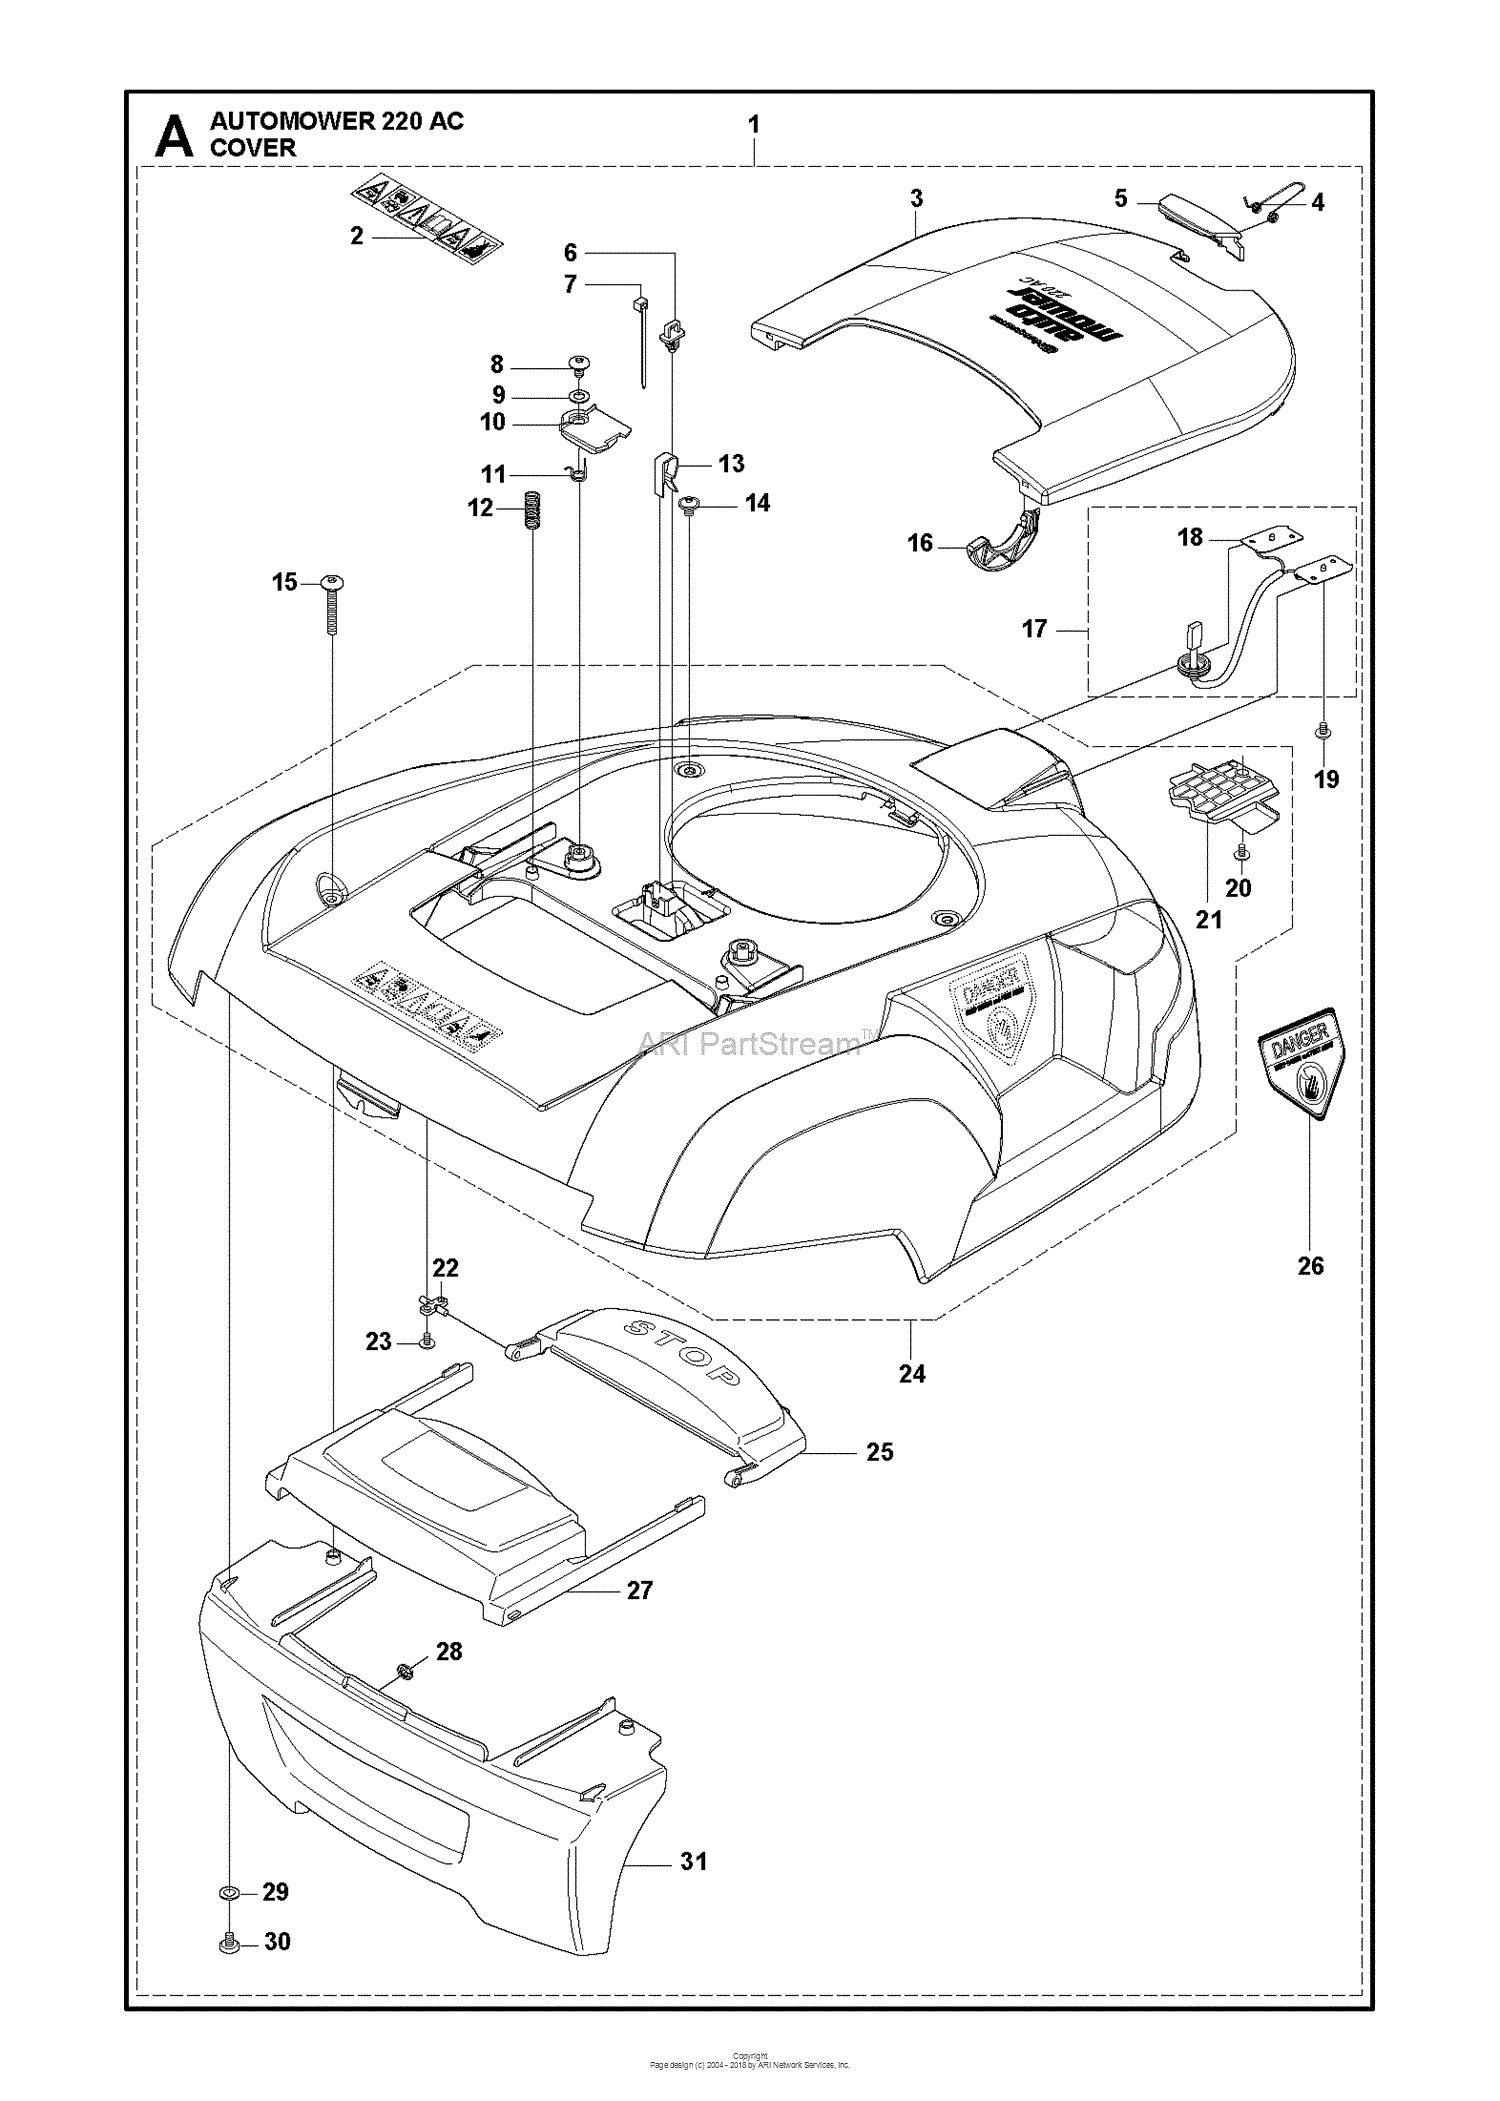 disk Clip sommerfugl Troubled Husqvarna AUTOMOWER 220 AC (2013-01) Parts Diagram for COVER